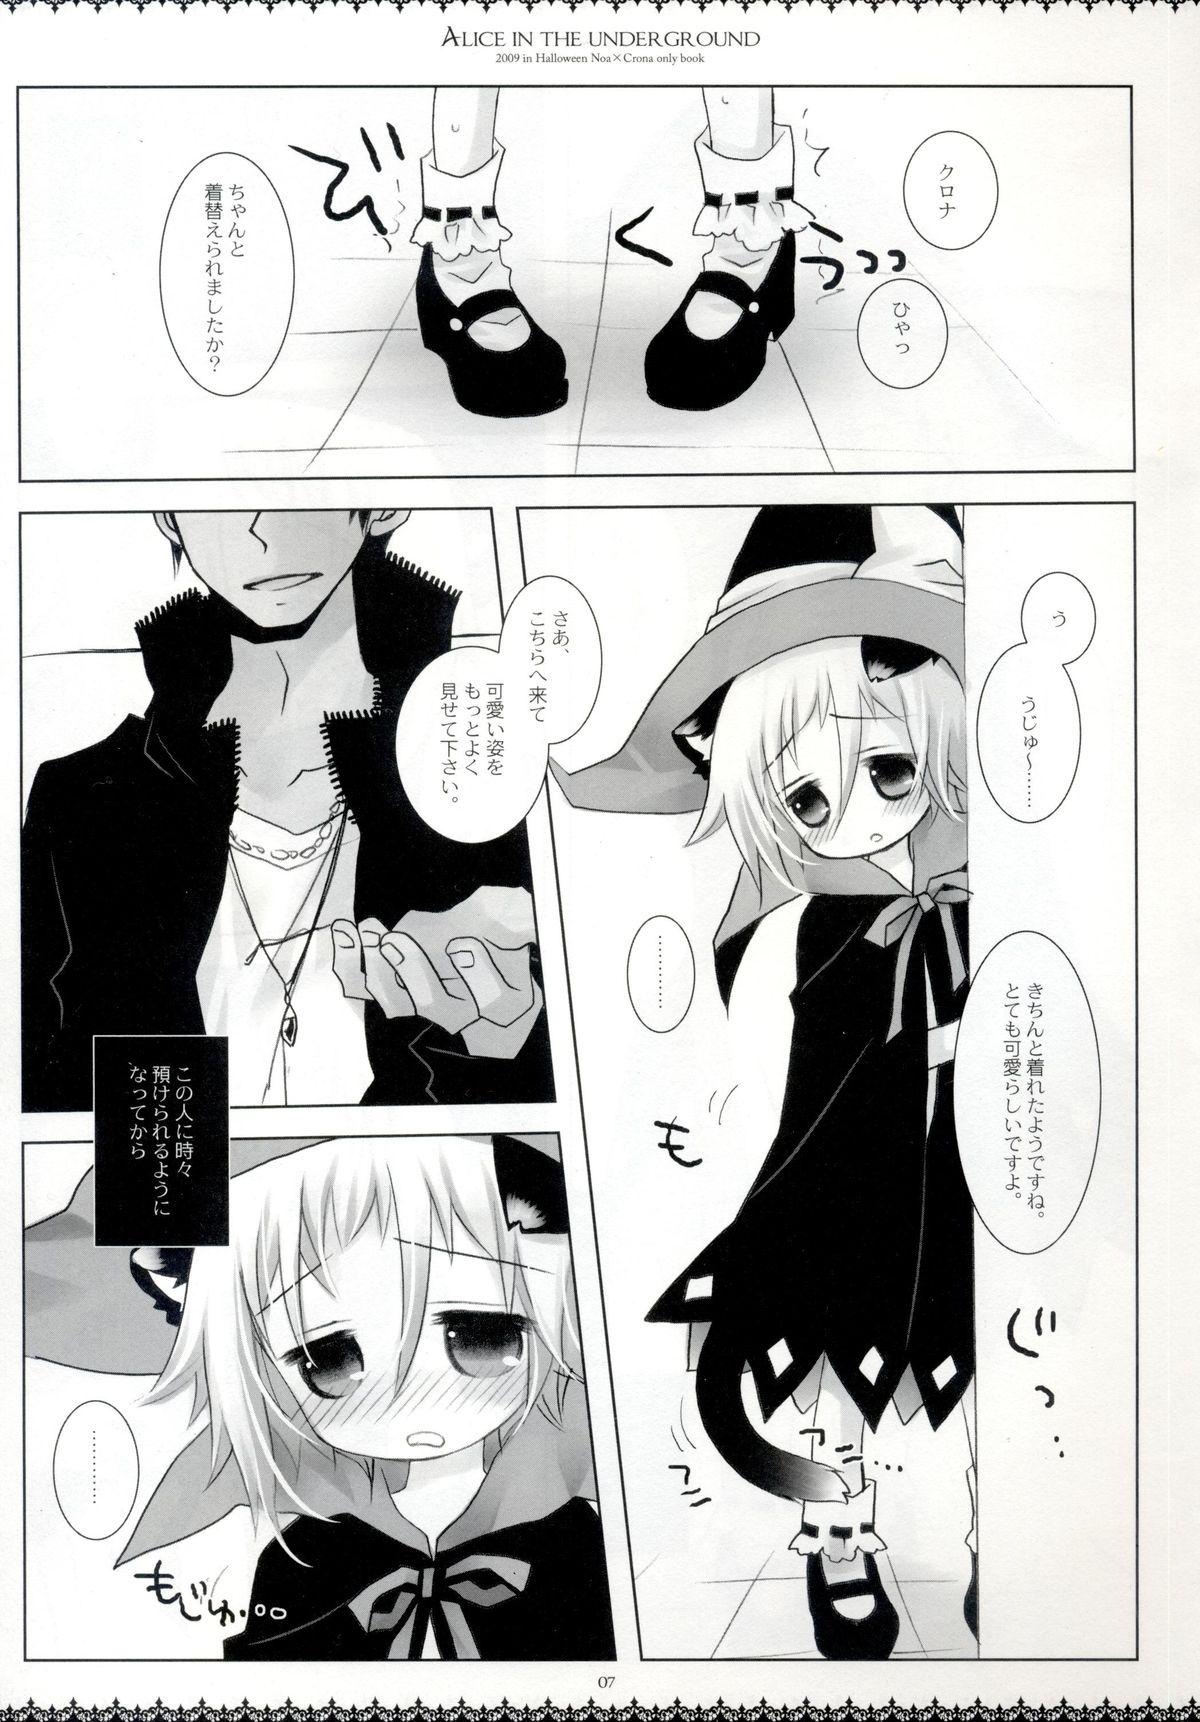 Bigcocks Alice in the underground - Soul eater Grosso - Page 6